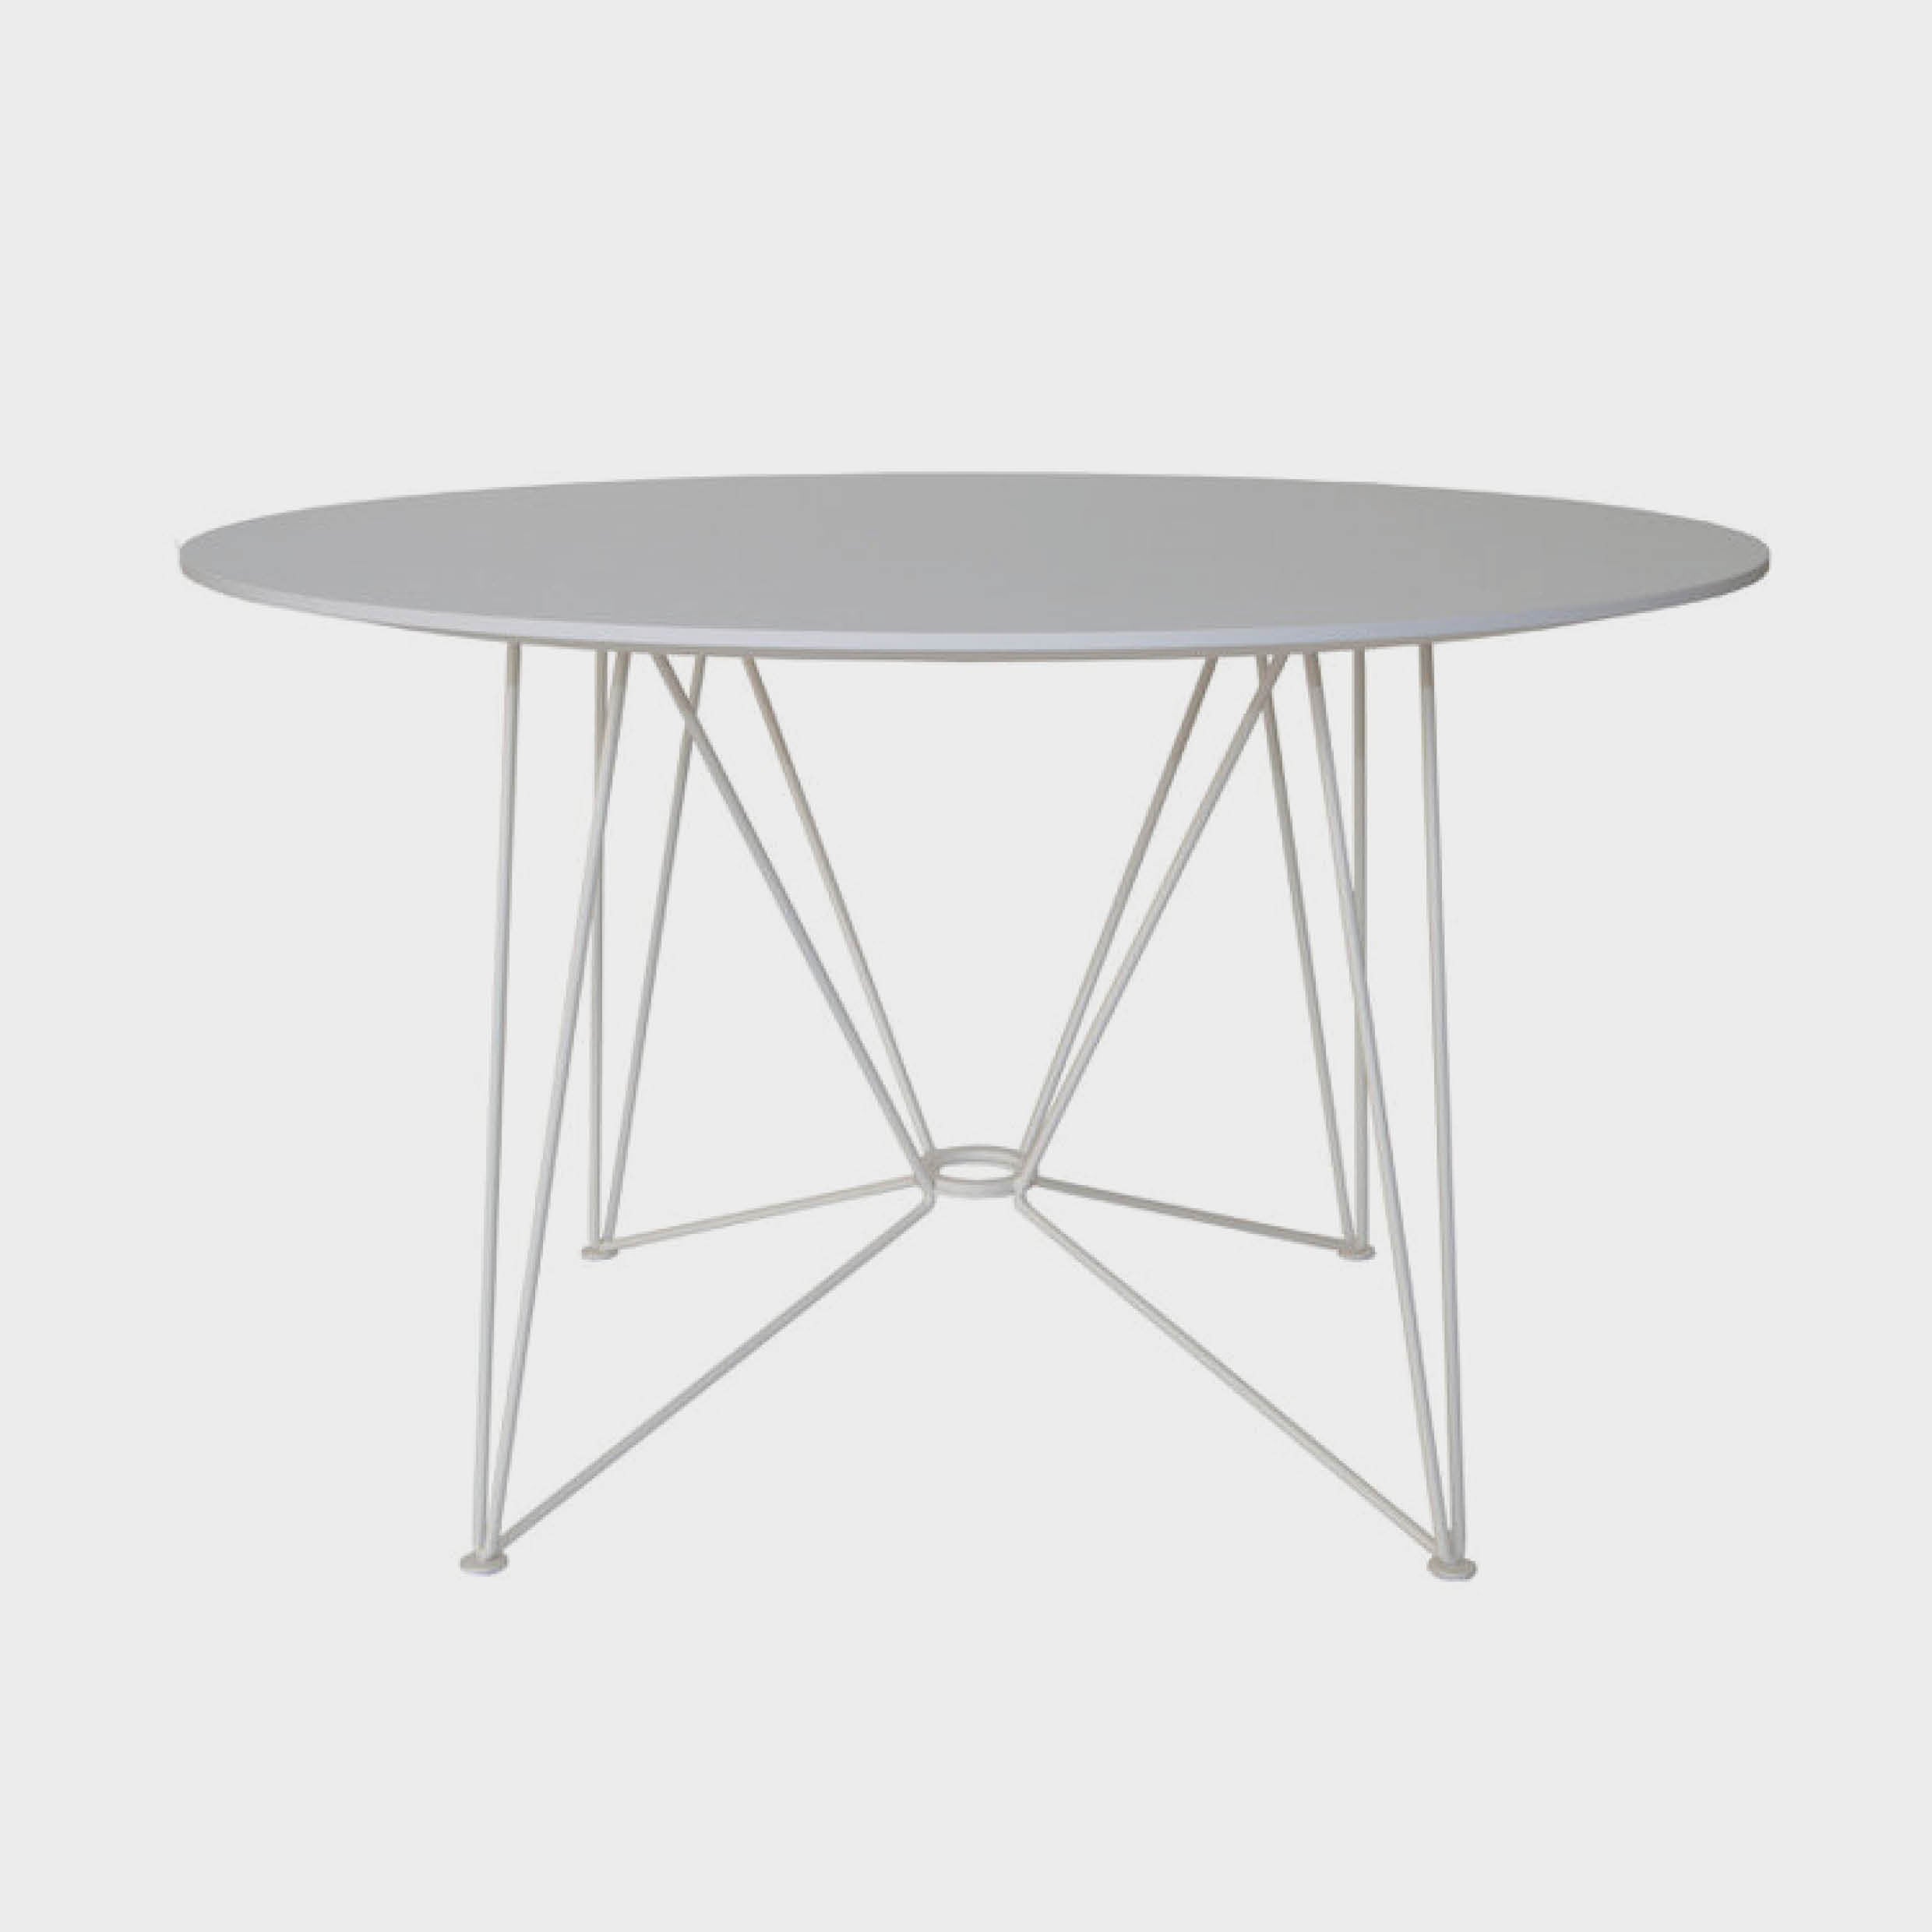 The Ring Table Blanco